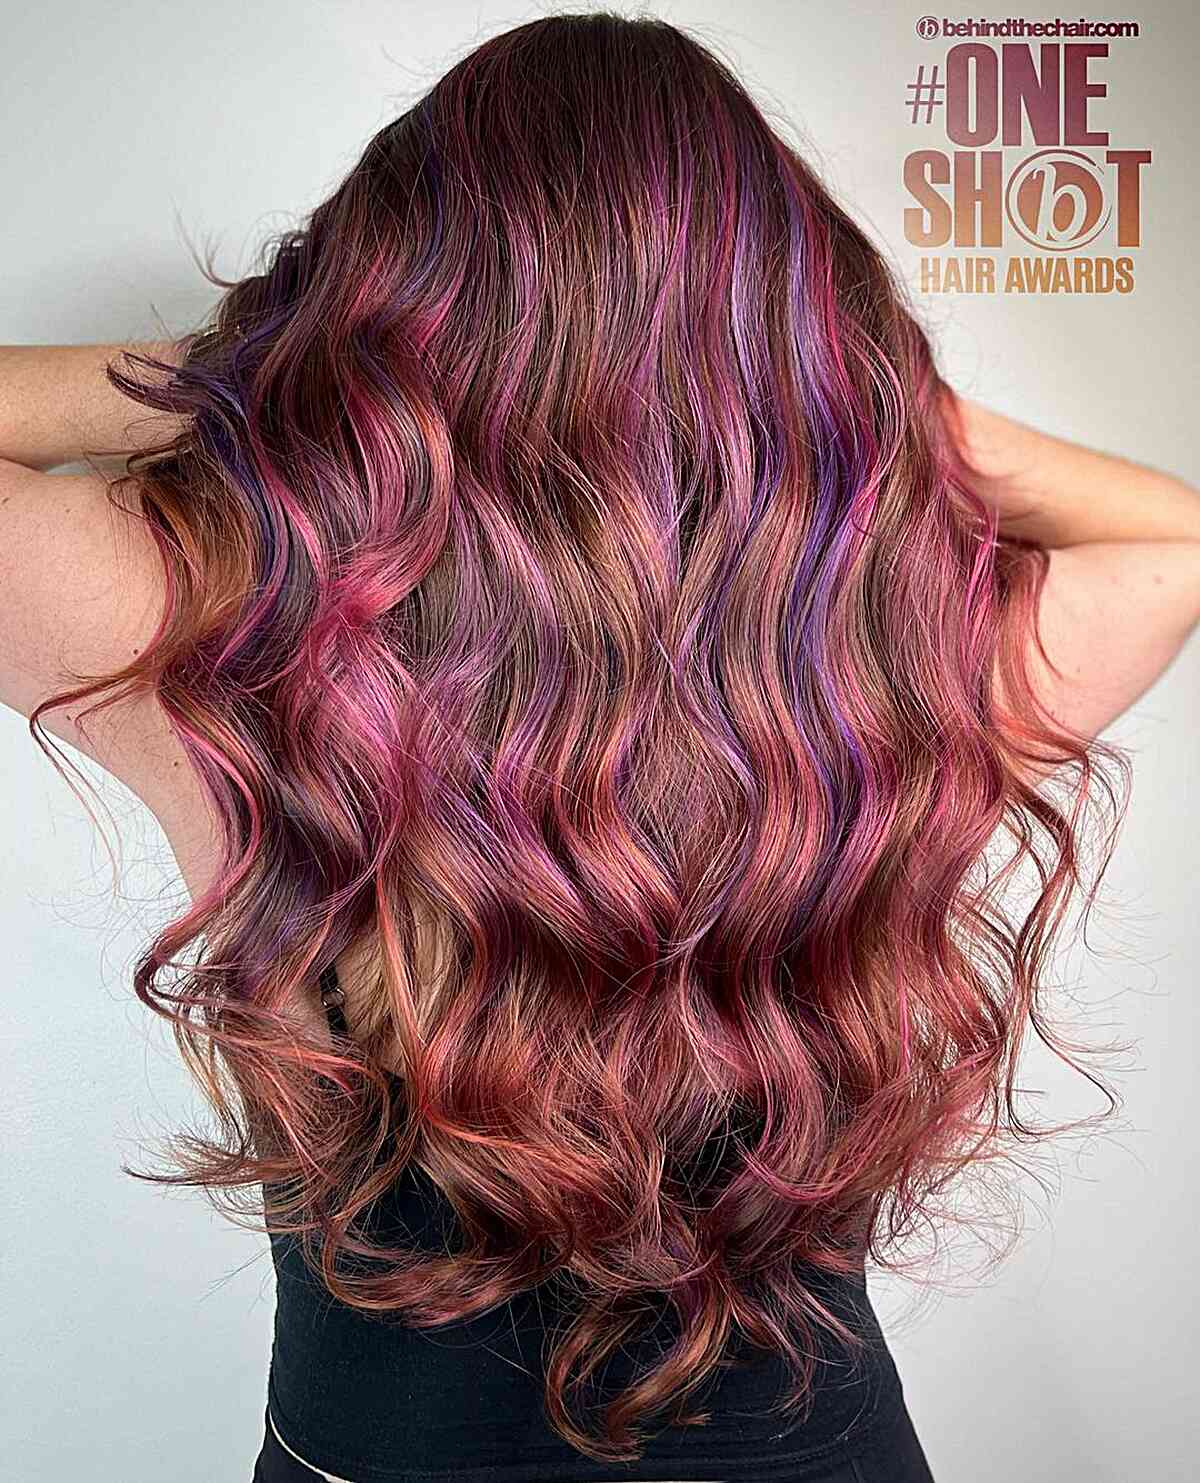 Perfect Mermaid Hair Highlights with red violet and brown